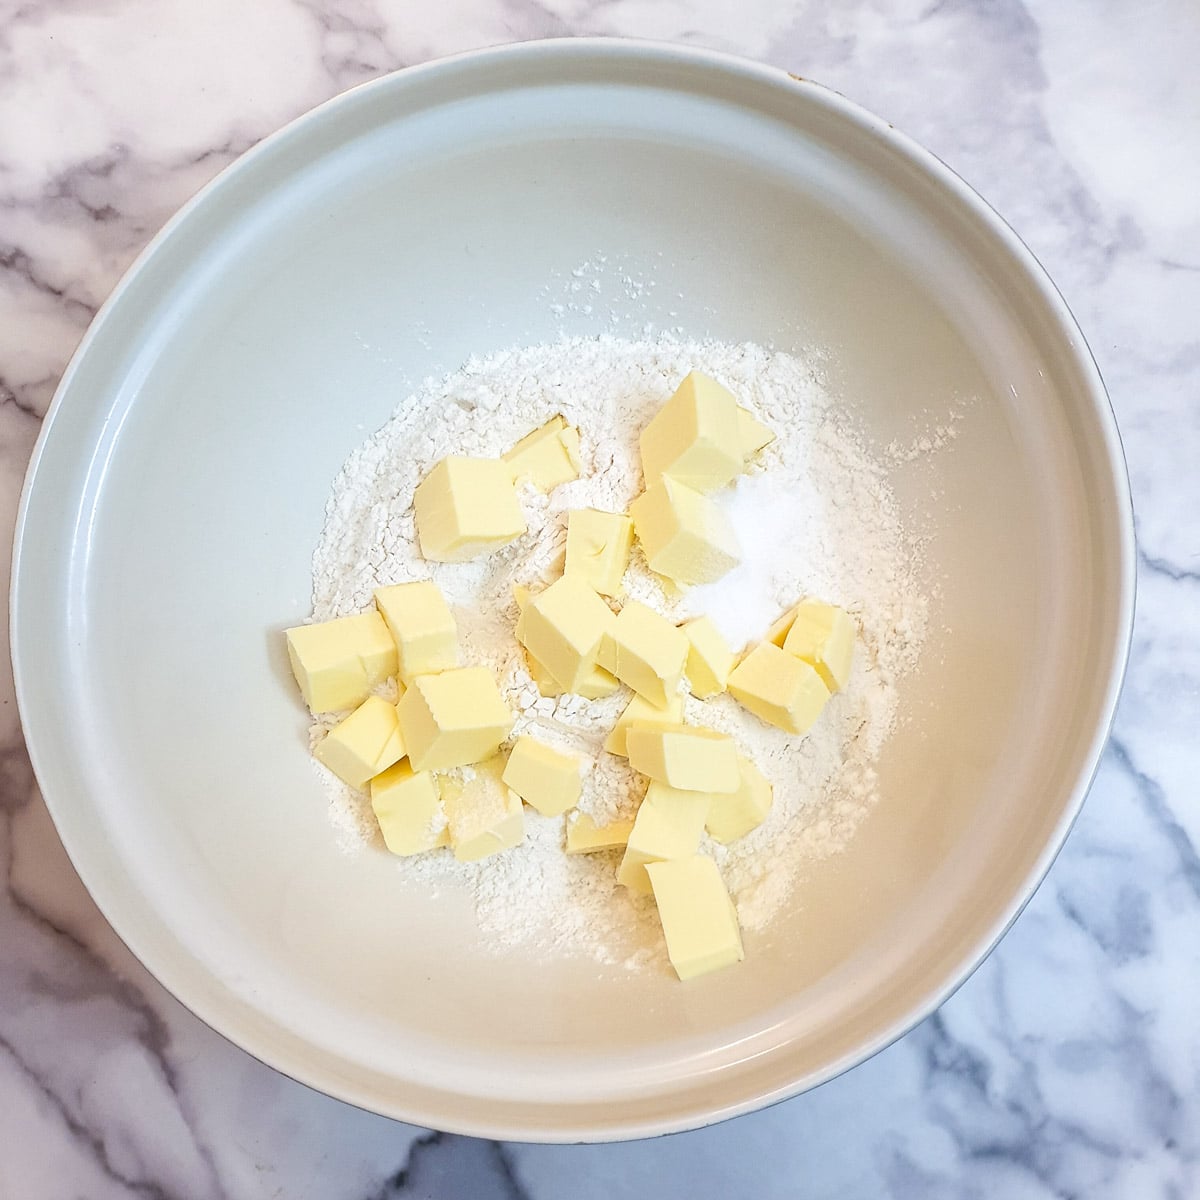 Flour and cubed butter in a mixing bowl.